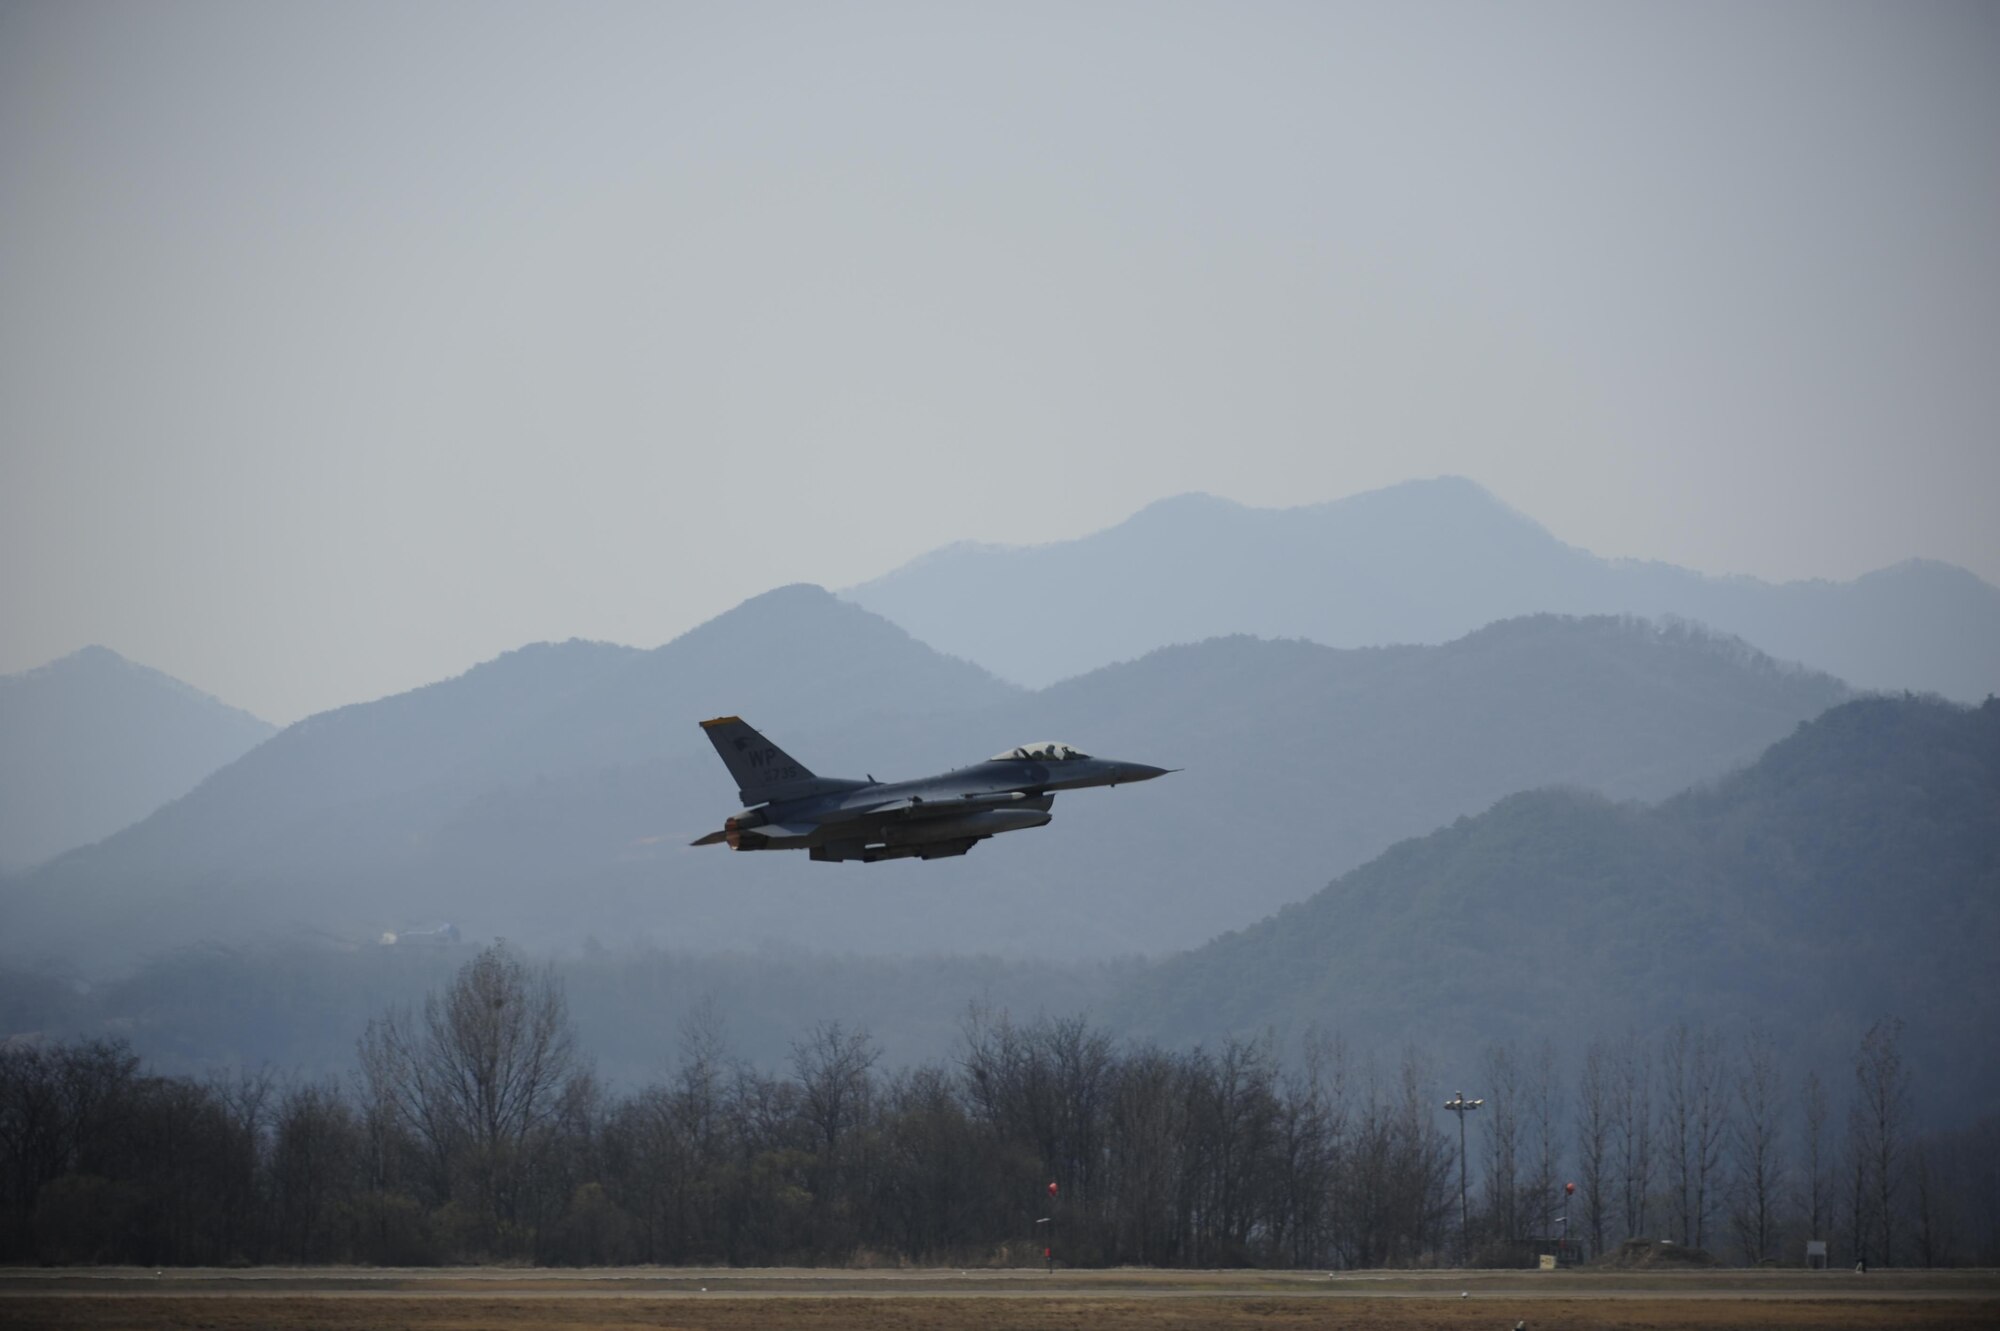 An F-16 Fighting Falcon from the 80th Fighter Squadron takes off during Buddy Wing 16-3 at Jungwon Air Base, Republic of Korea, March 30, 2016. Buddy Wing training, held multiple times a year, polishes the ability of the Republic of Korea and U.S. pilots to train and operate as a combined force. (U.S. Air Force photo by Staff Sgt. Nick Wilson/Released)